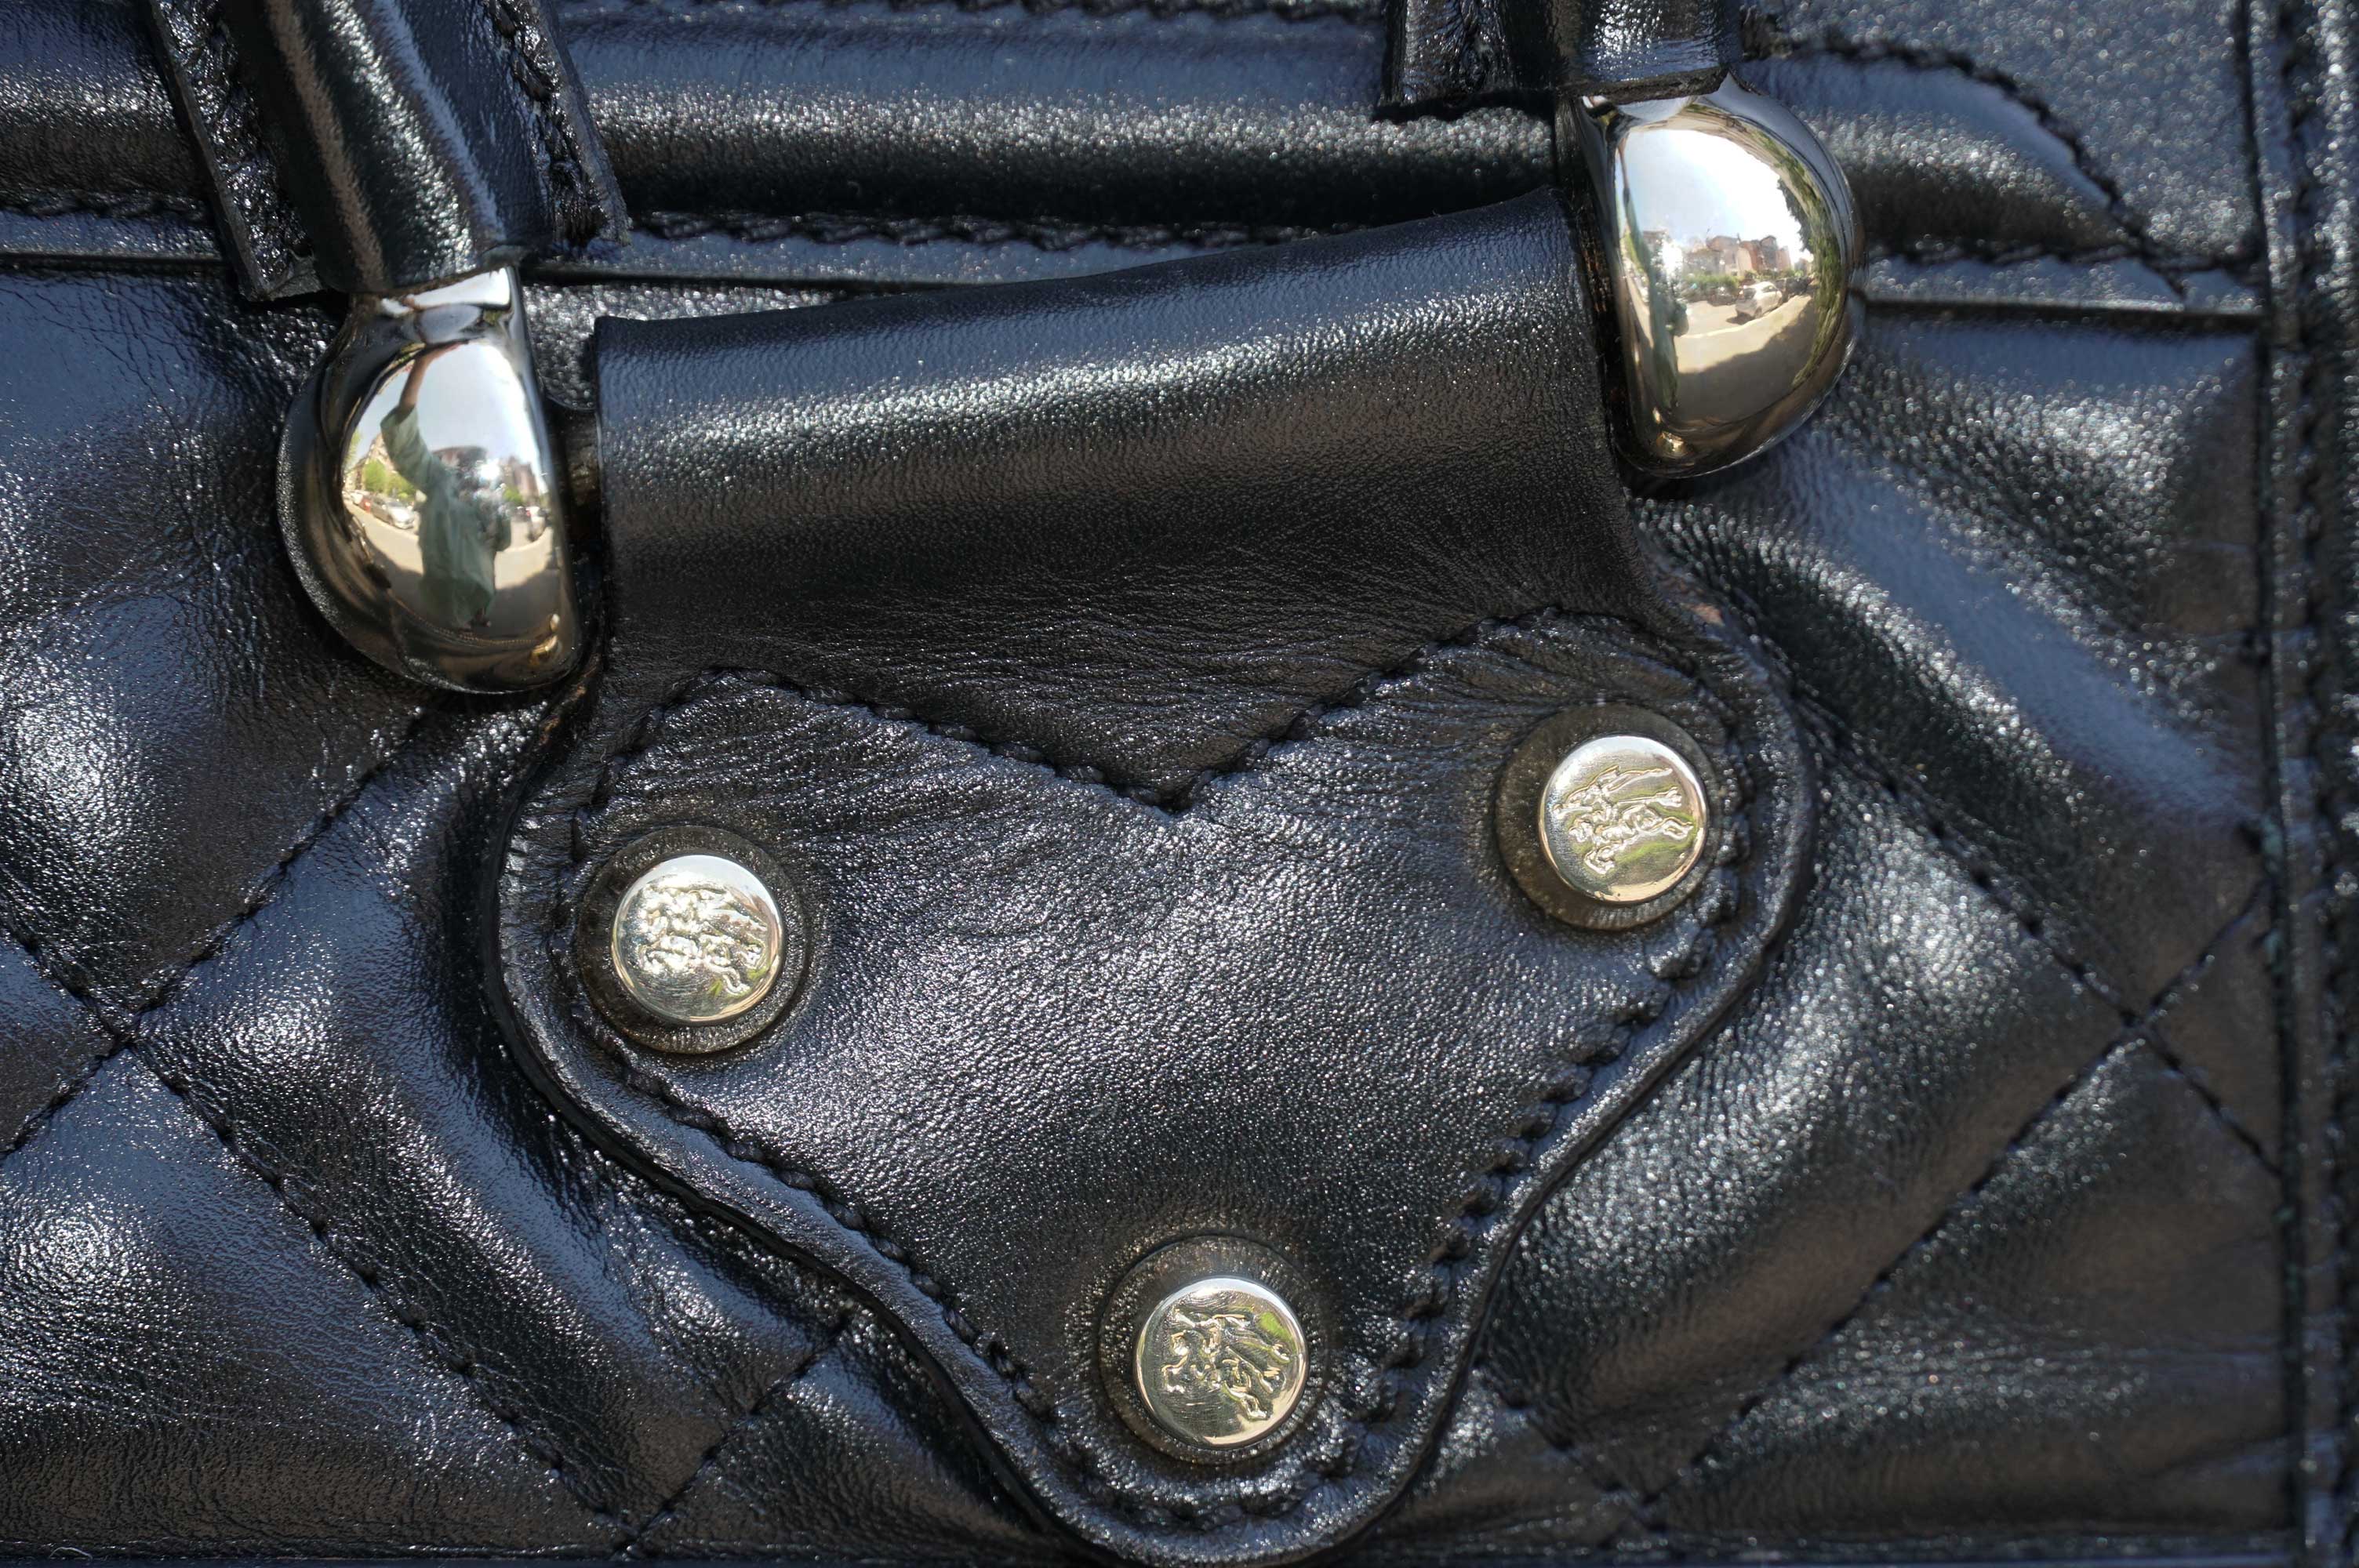 BURBERRY QUILTED LEATHER HANDBAG